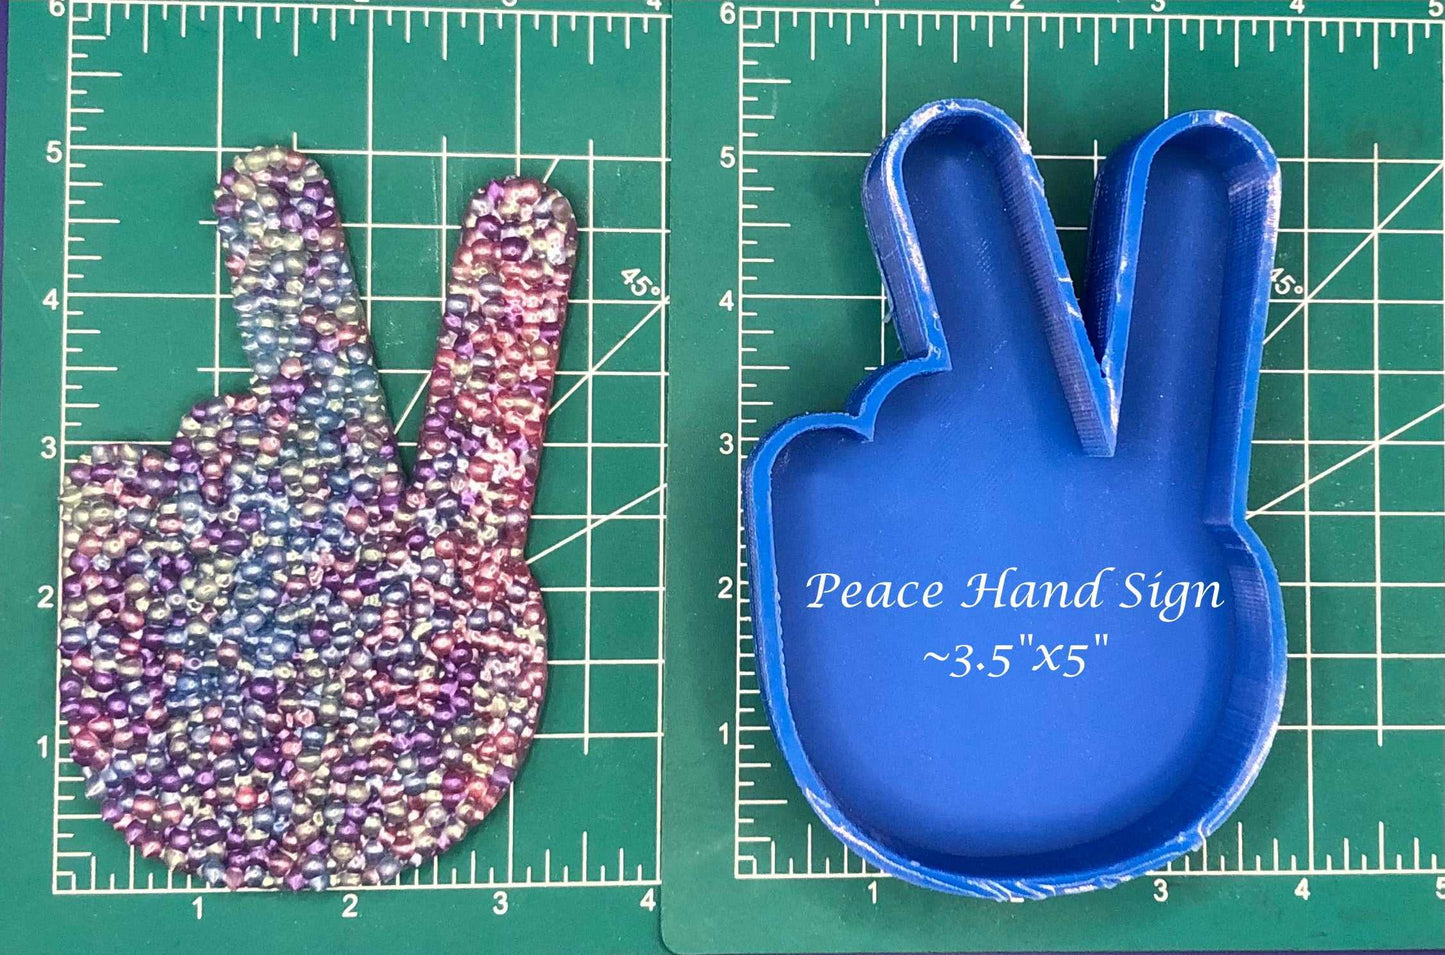 Peace - Hand Sign -  Silicone Freshie Mold - Silicone Mold